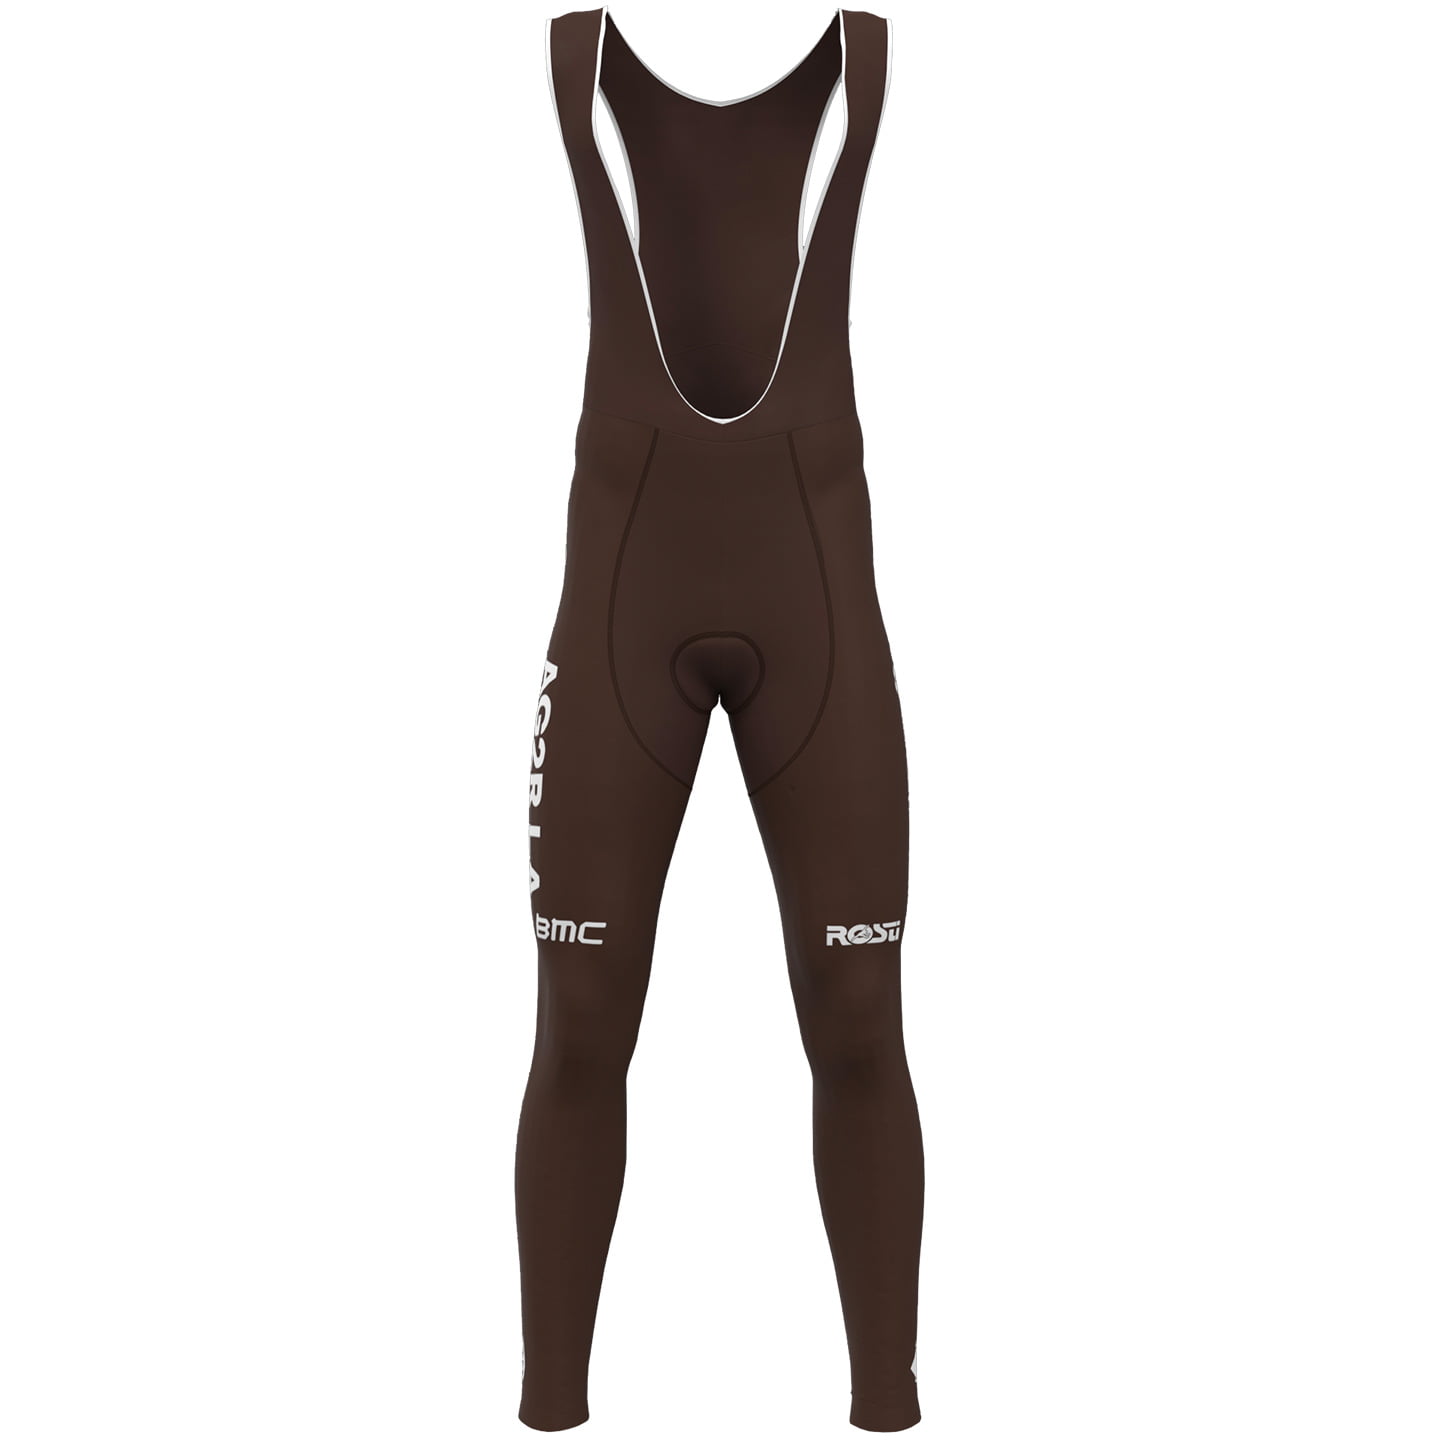 AG2R CITROEN TEAM 2023 Bib Tights, for men, size 2XL, Cycle trousers, Cycle gear